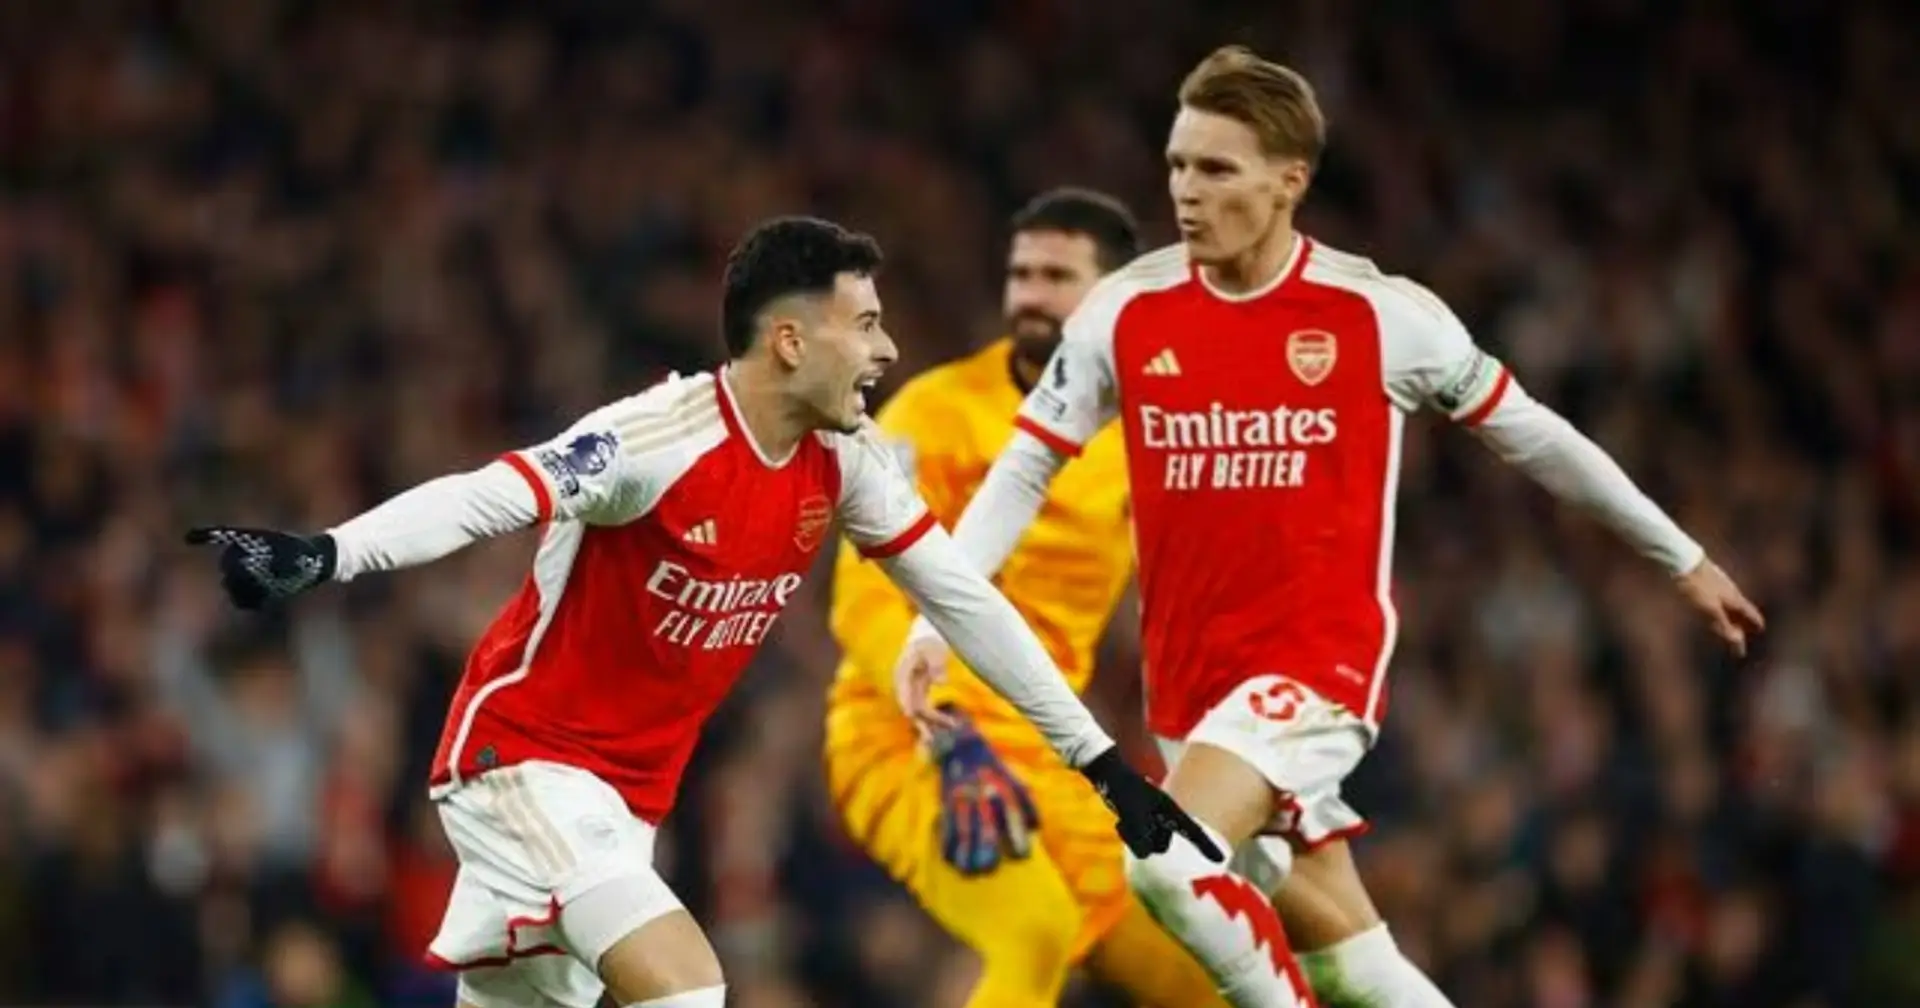 'The boy is fearless': Arsenal fans praise one player after Liverpool win amid his inconsistent season